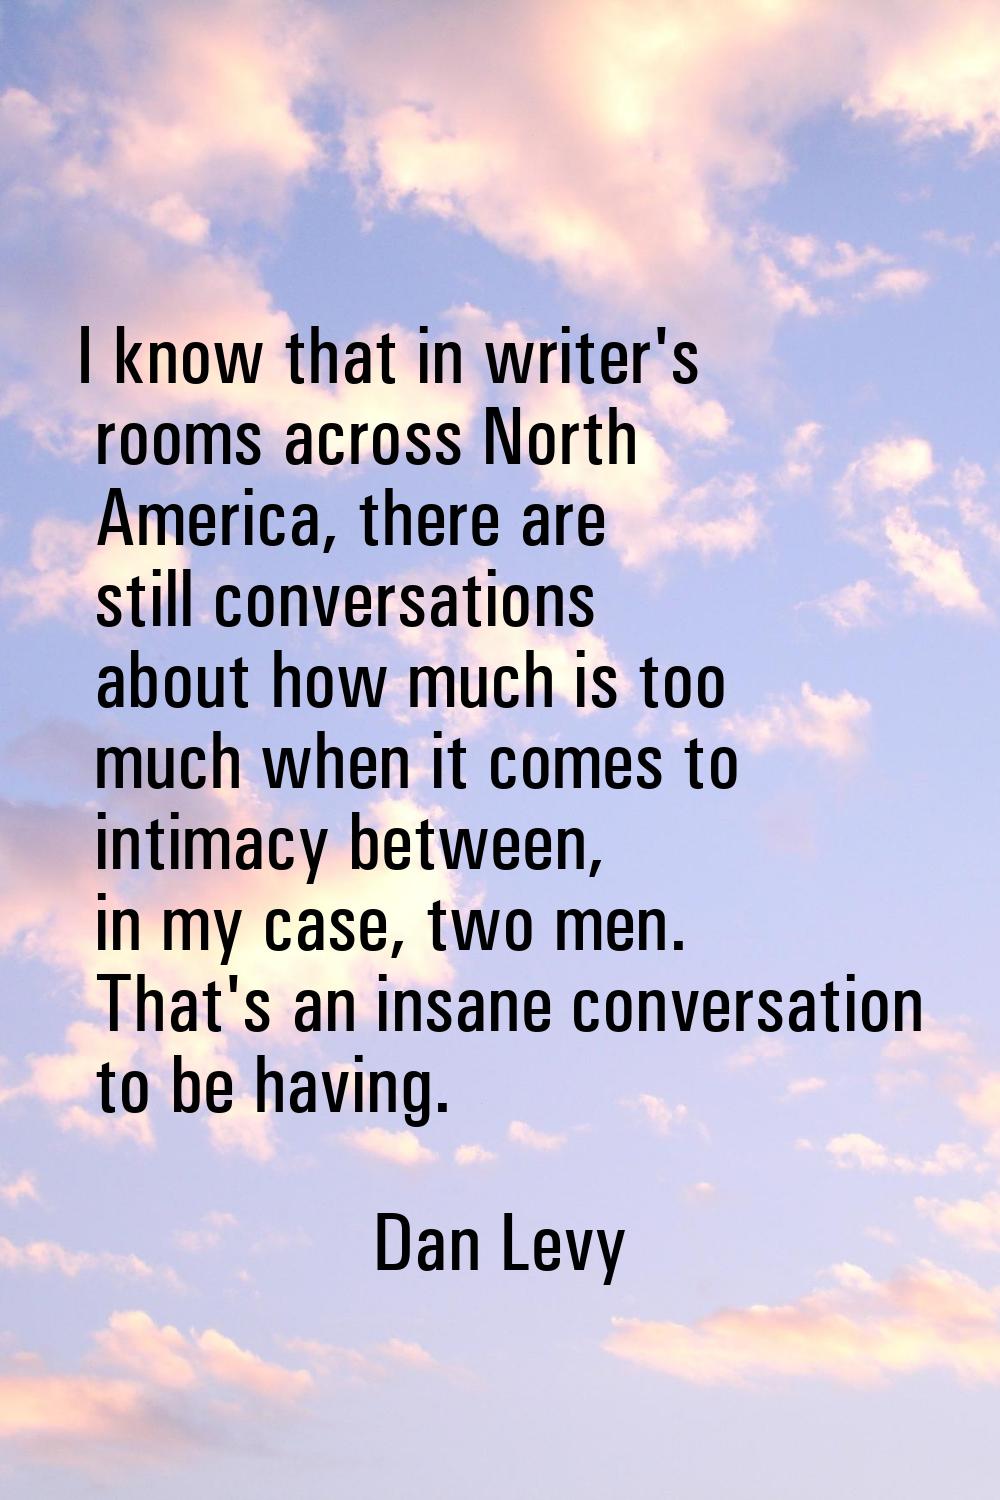 I know that in writer's rooms across North America, there are still conversations about how much is